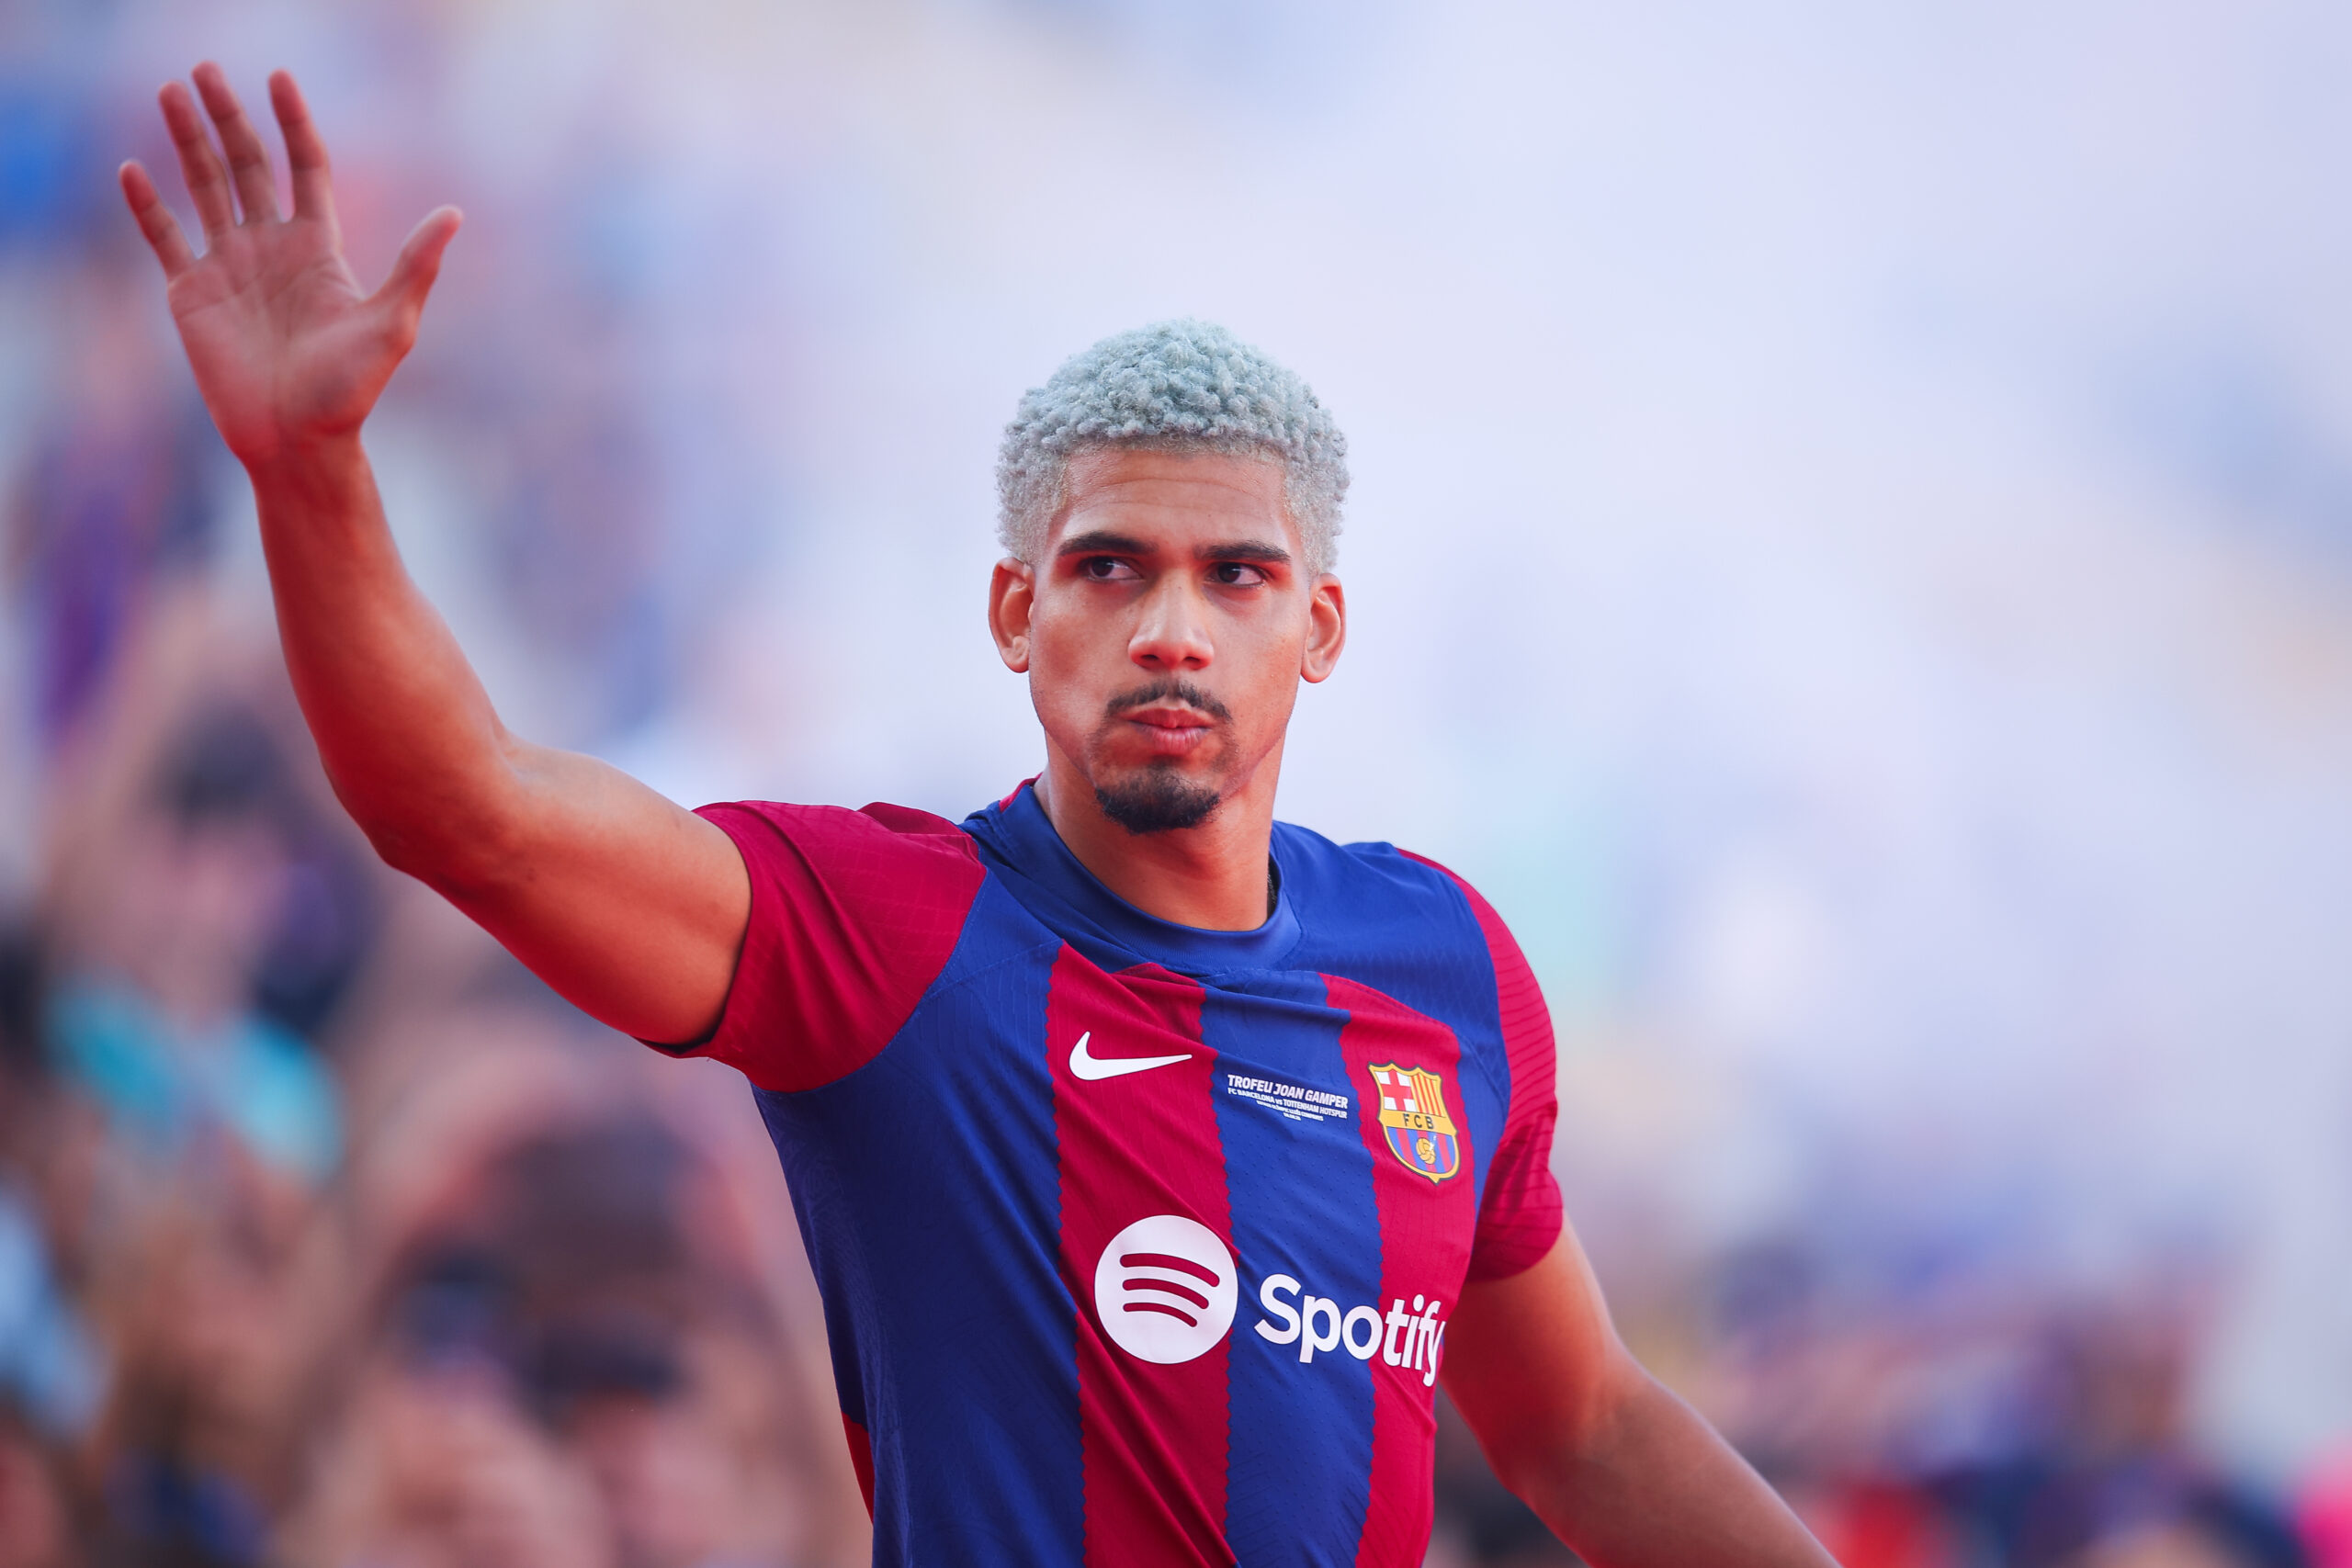 BARCELONA, SPAIN - AUGUST 08: Ronald Araujo of FC Barcelona waves the supporters prior to the Joan Gamper Trophy match between FC Barcelona and Tottenham Hotspur at Estadi Olimpic Lluis Companys on August 08, 2023 in Barcelona, Spain.